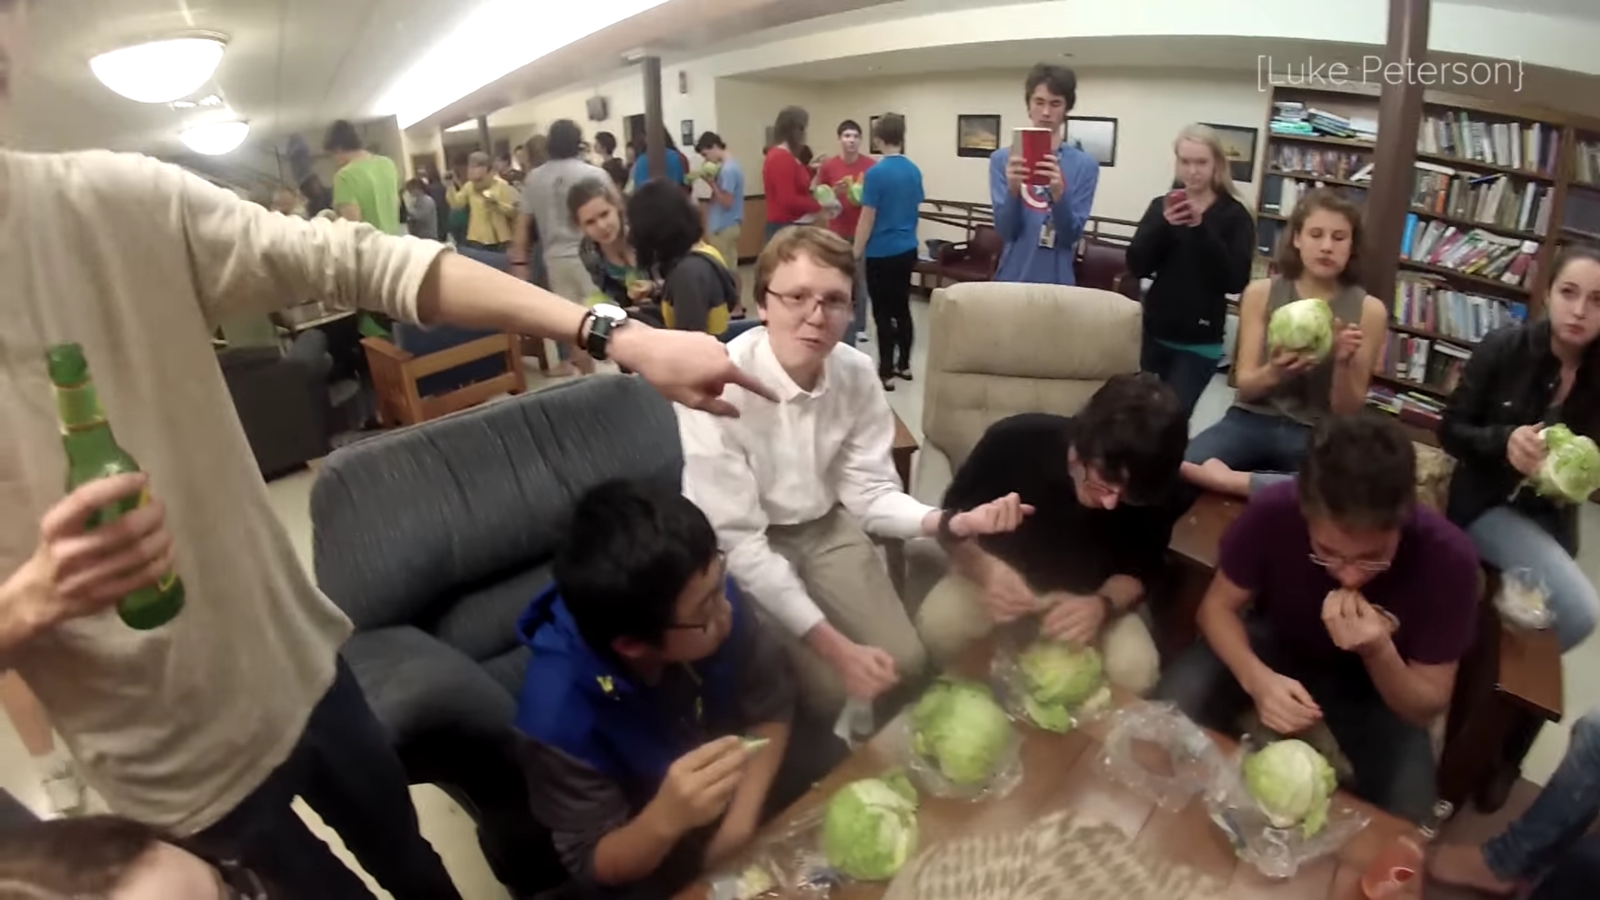 Teens Are Competitively Eating Whole Heads Of Lettuce And It's Insane